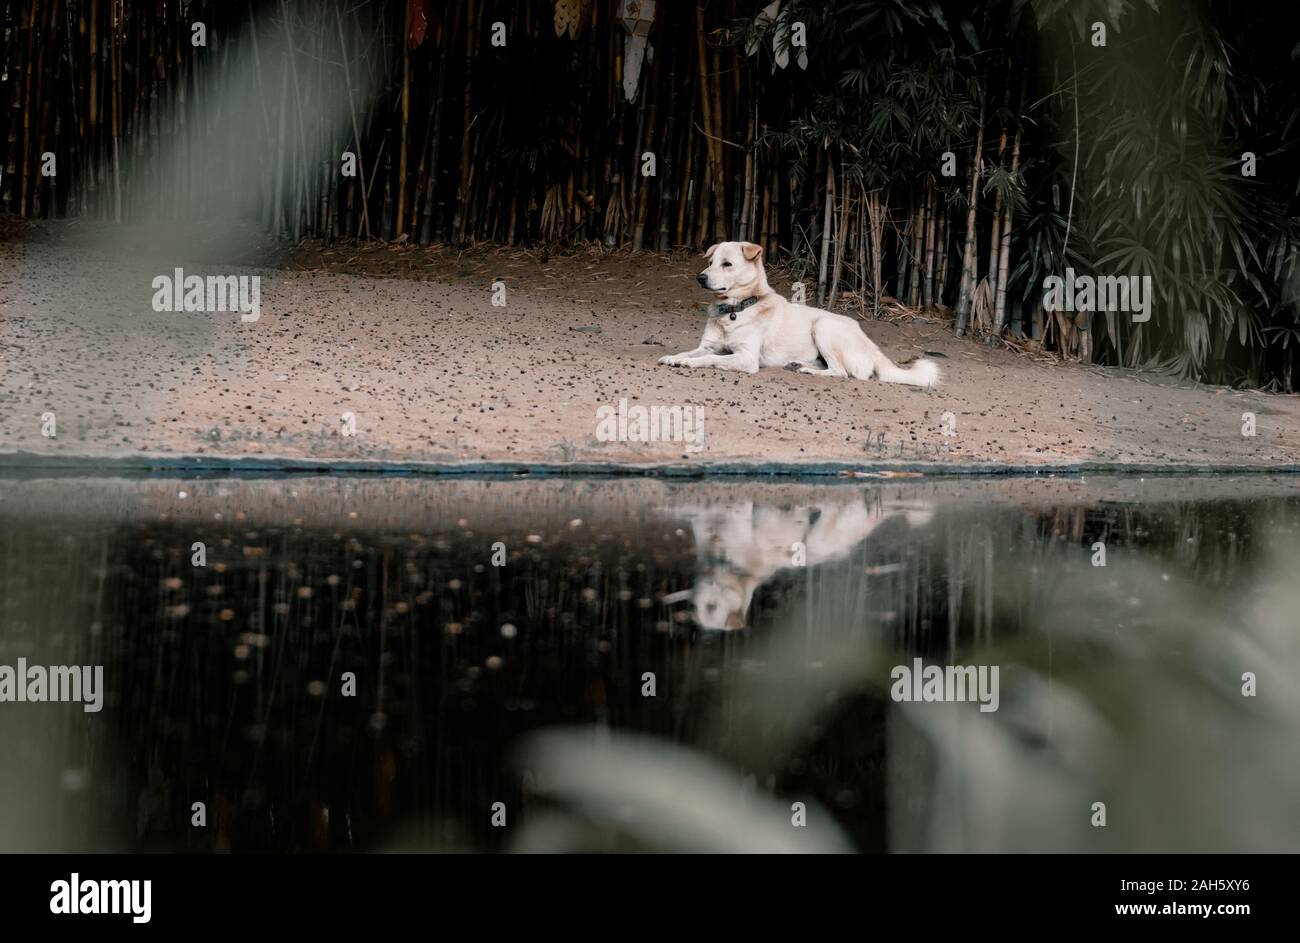 a dog waiting for its owner next to a lake with a reflection Stock Photo